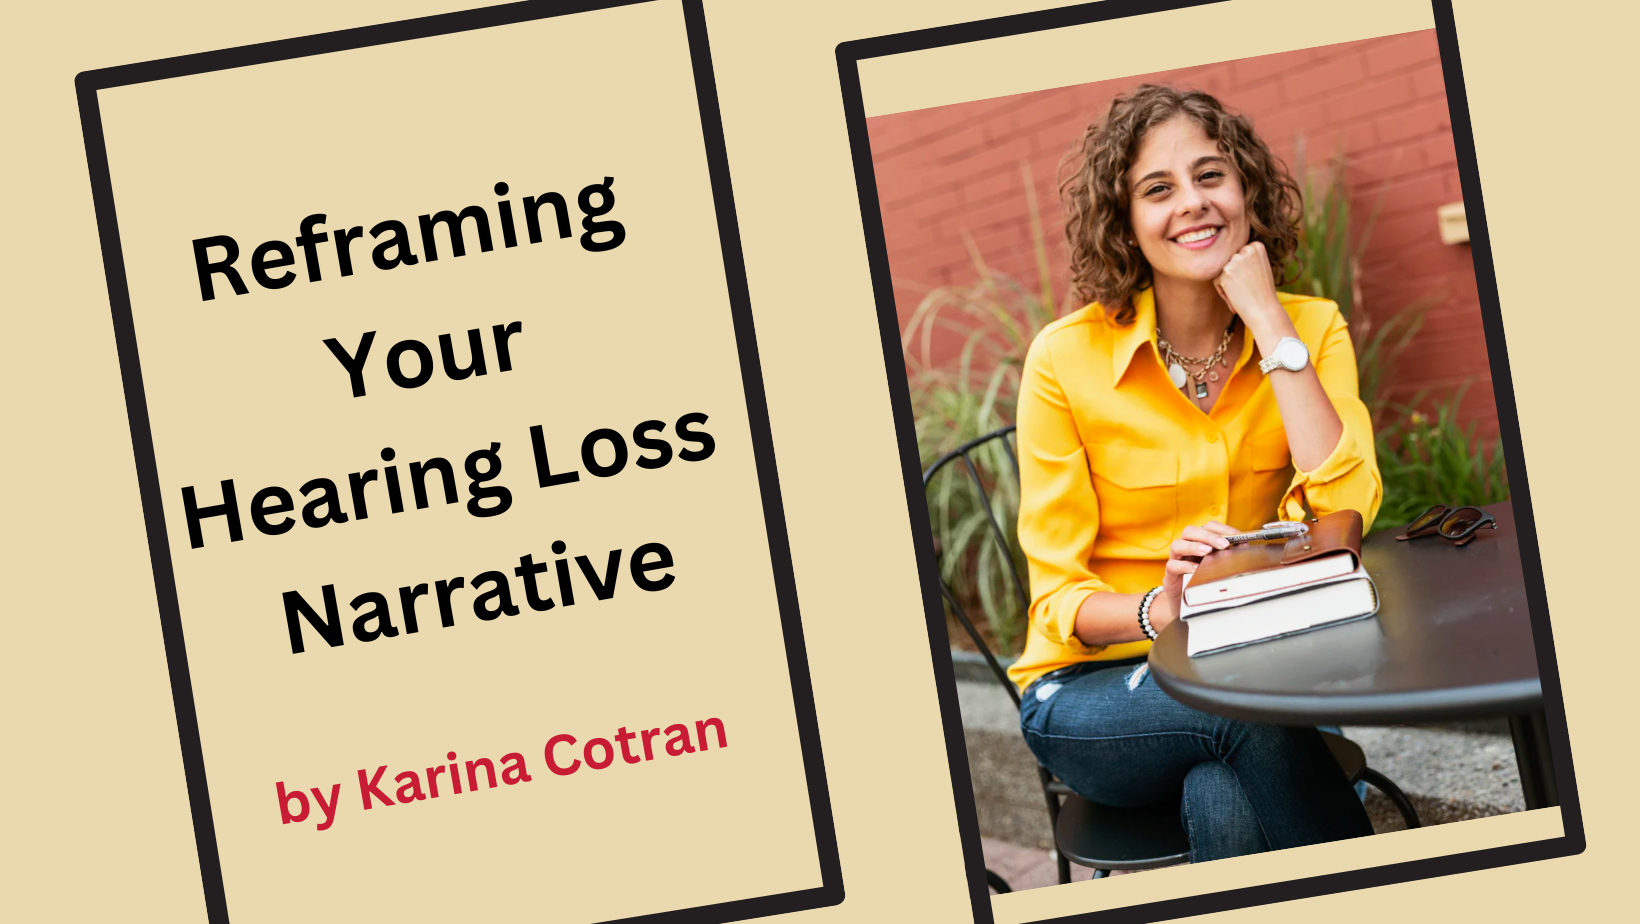 Featured image for “Reframing Your Hearing Loss Narrative (by Karina Cotran)”